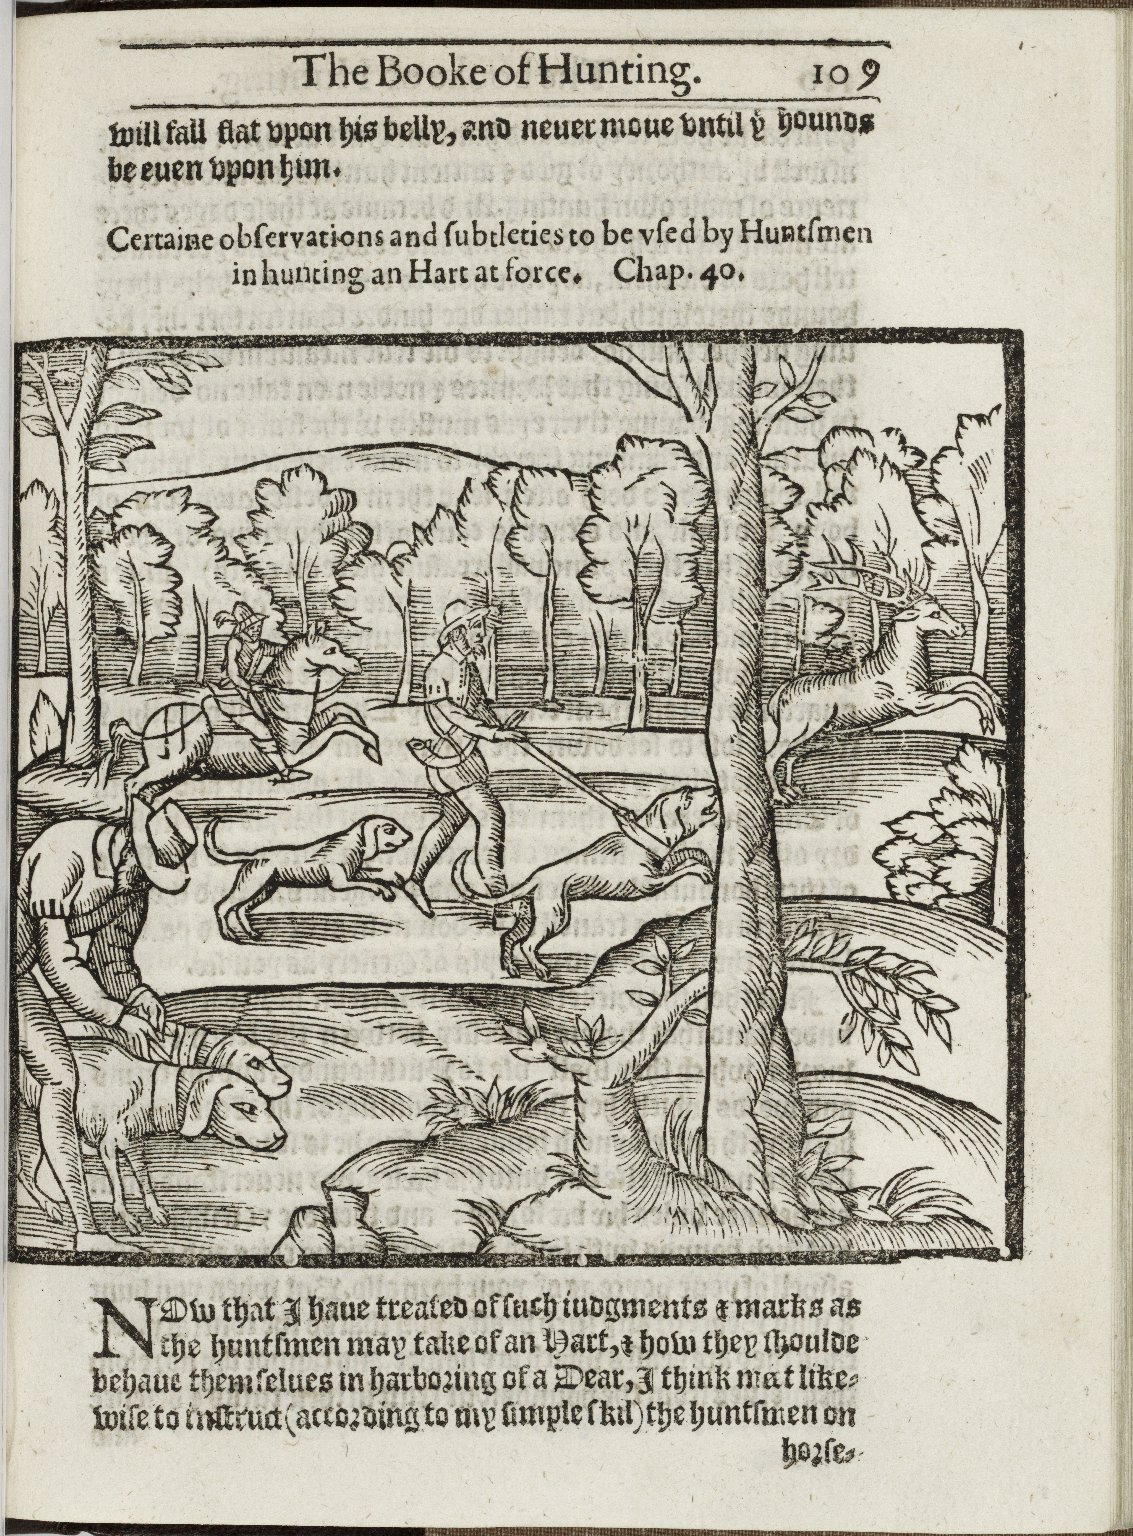 From The Noble Art of Venerie by George Gascoigne, 1611. Image courtesy of LUNA at the Folger Shakespeare Library.